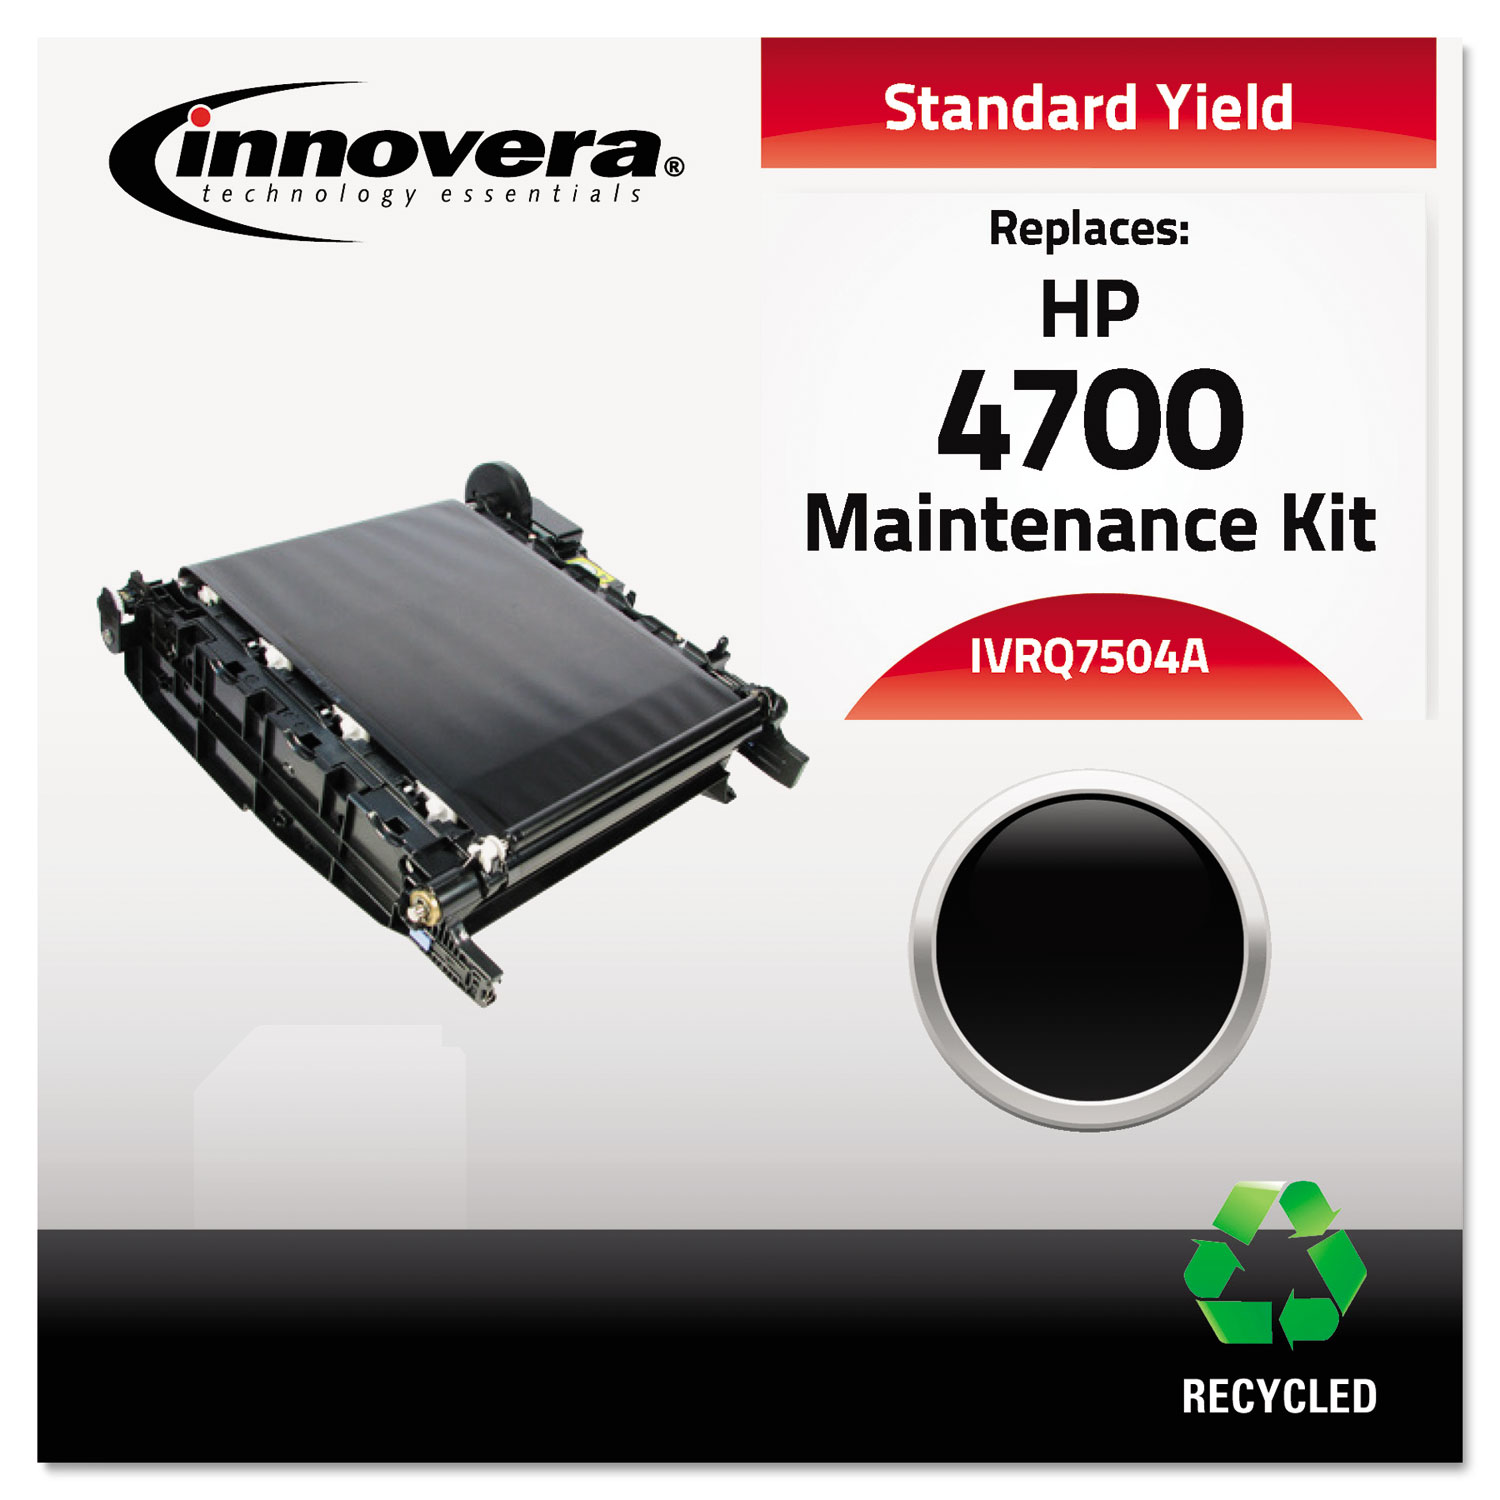  Innovera IVRQ7504A Remanufactured Q7504A (4700) Transfer Kit, 100000 Page-Yield, (IVRQ7504A) 